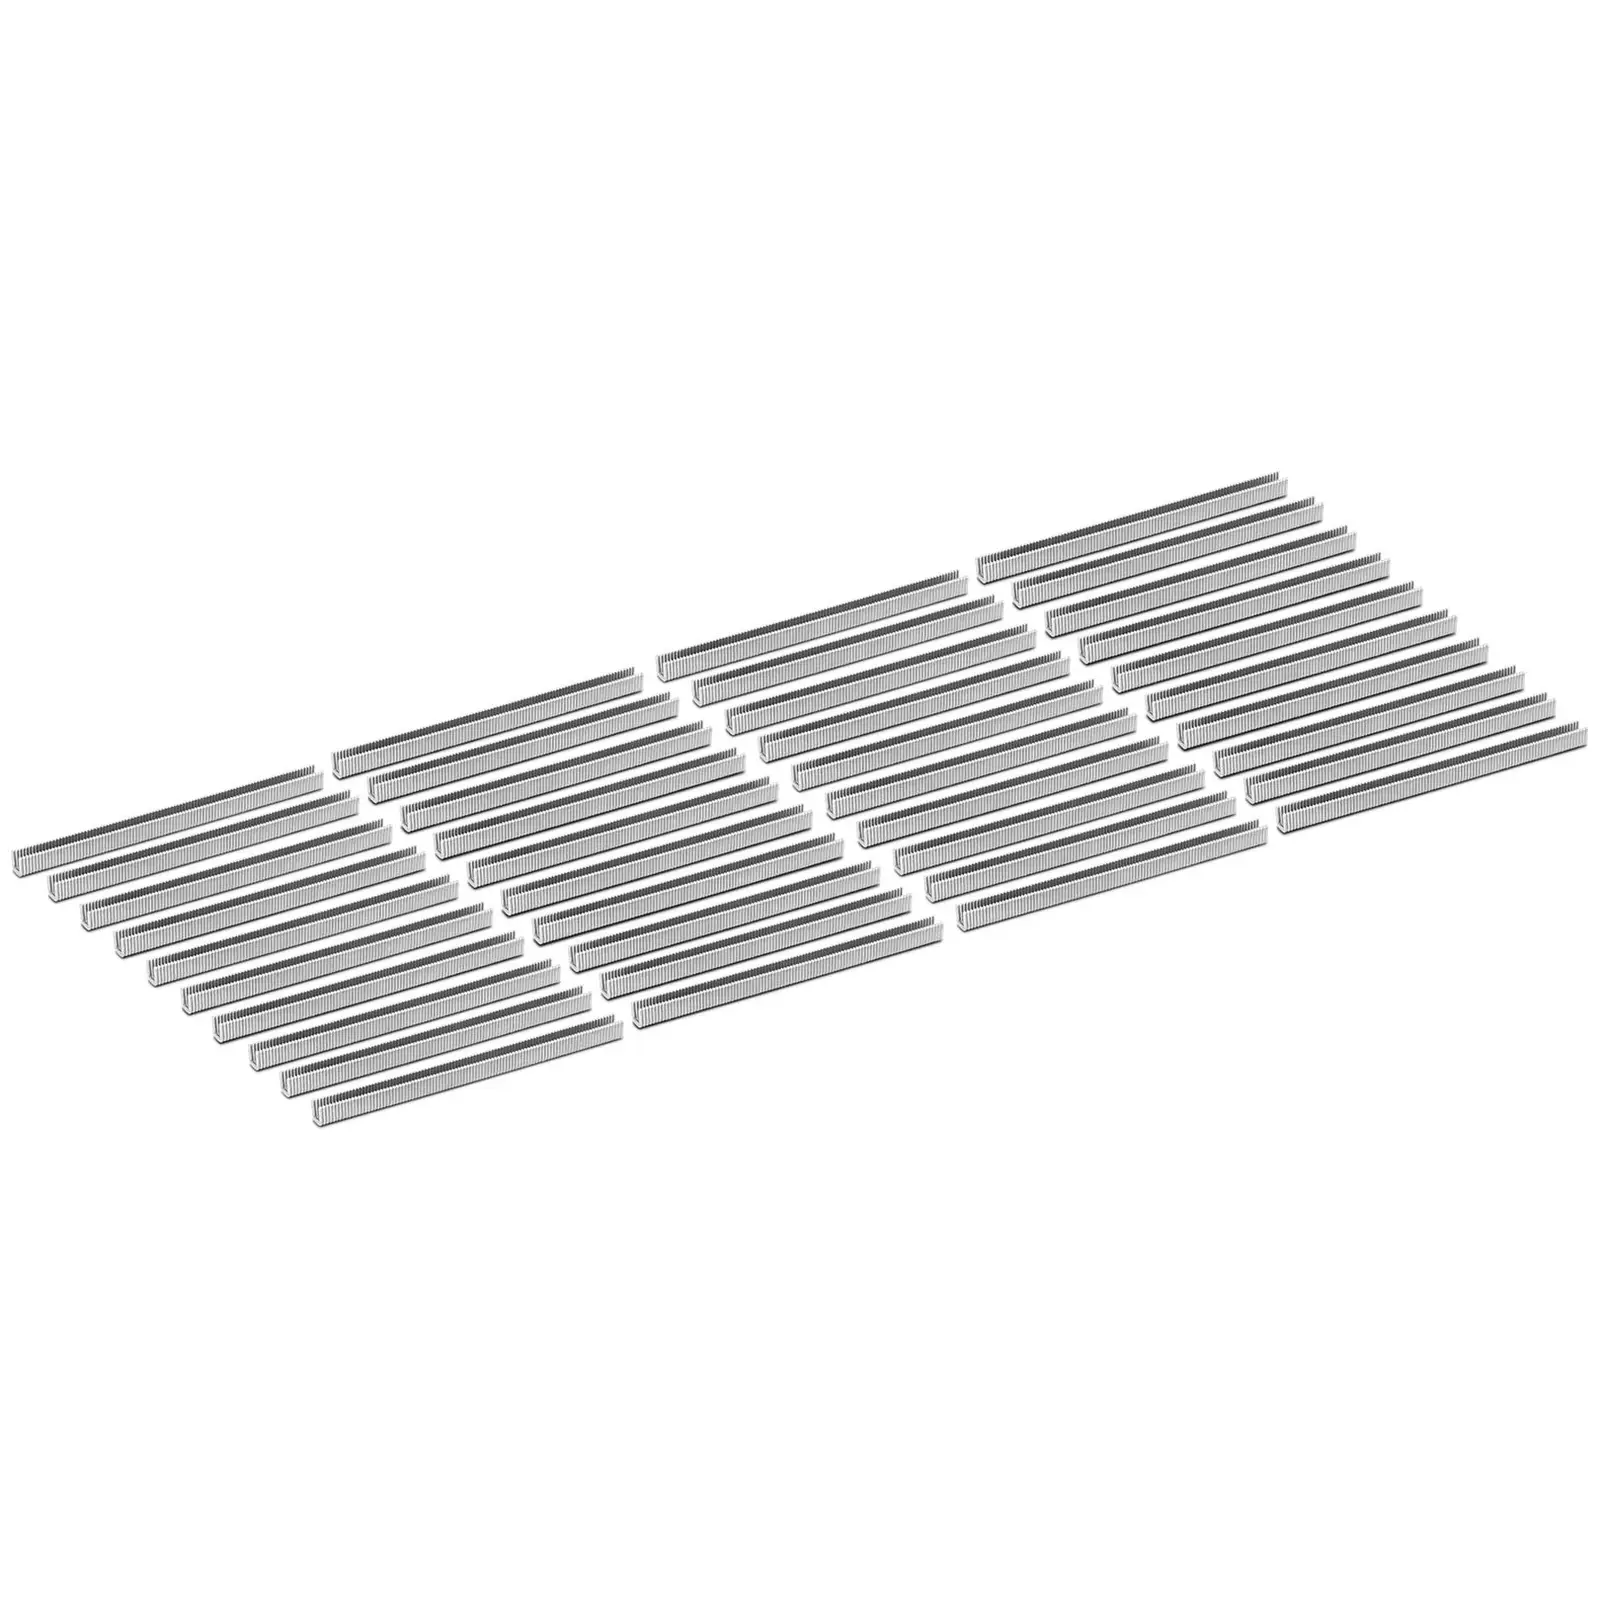 Clips for sausage clippers - 4000 pieces - 13 x 11.5 x 2 mm - royal_catering